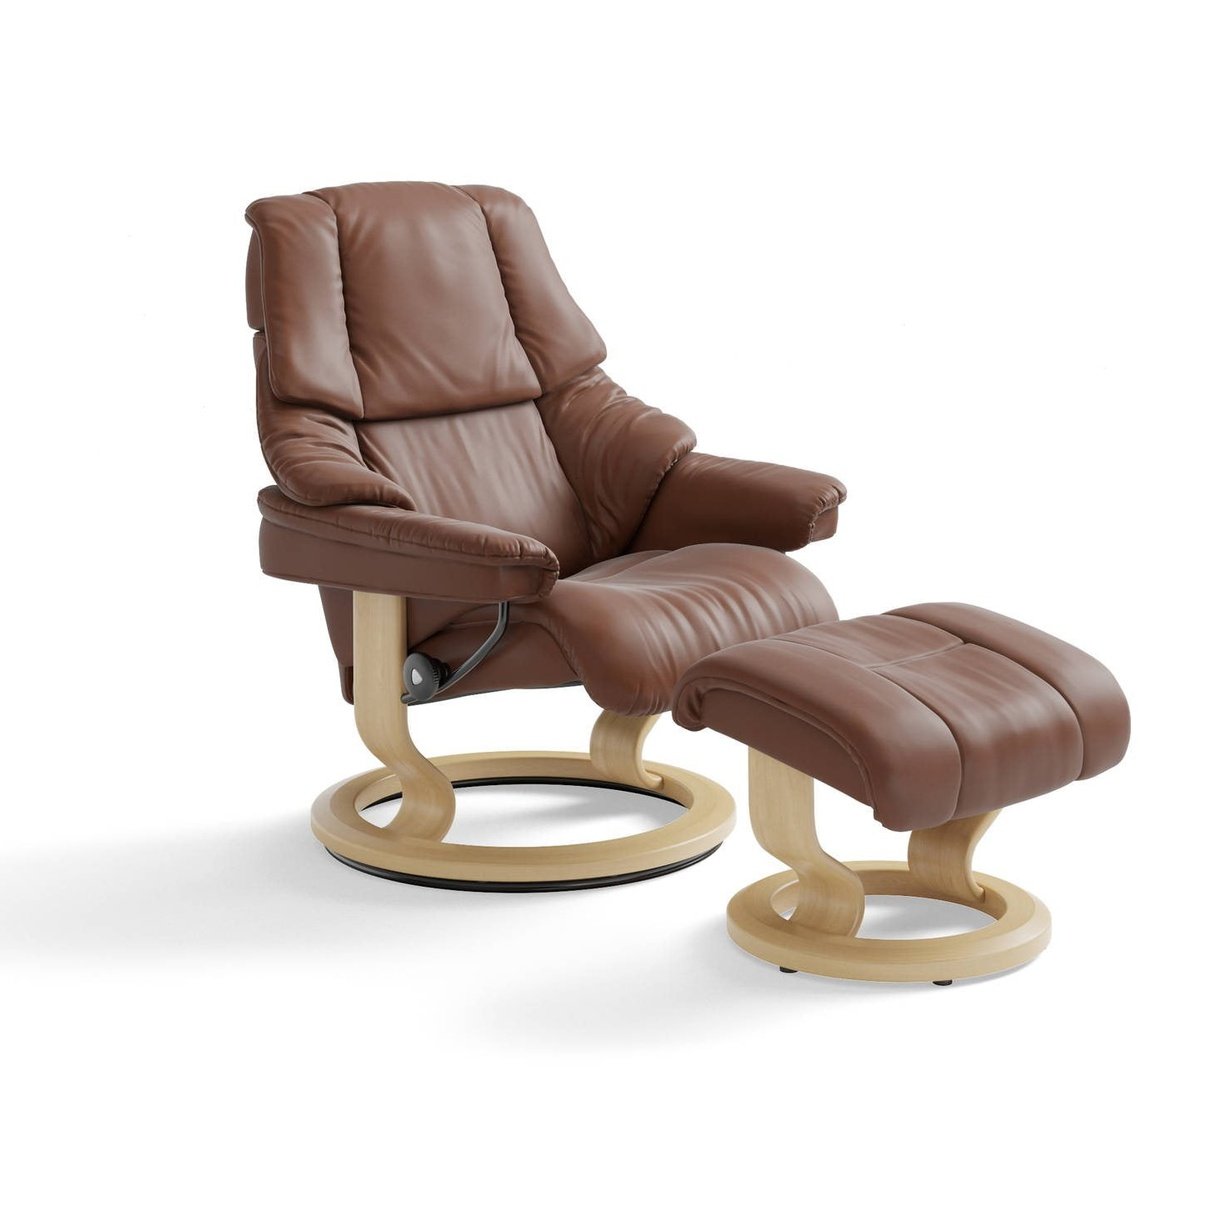 Stressless Reno Small Recliner Chair